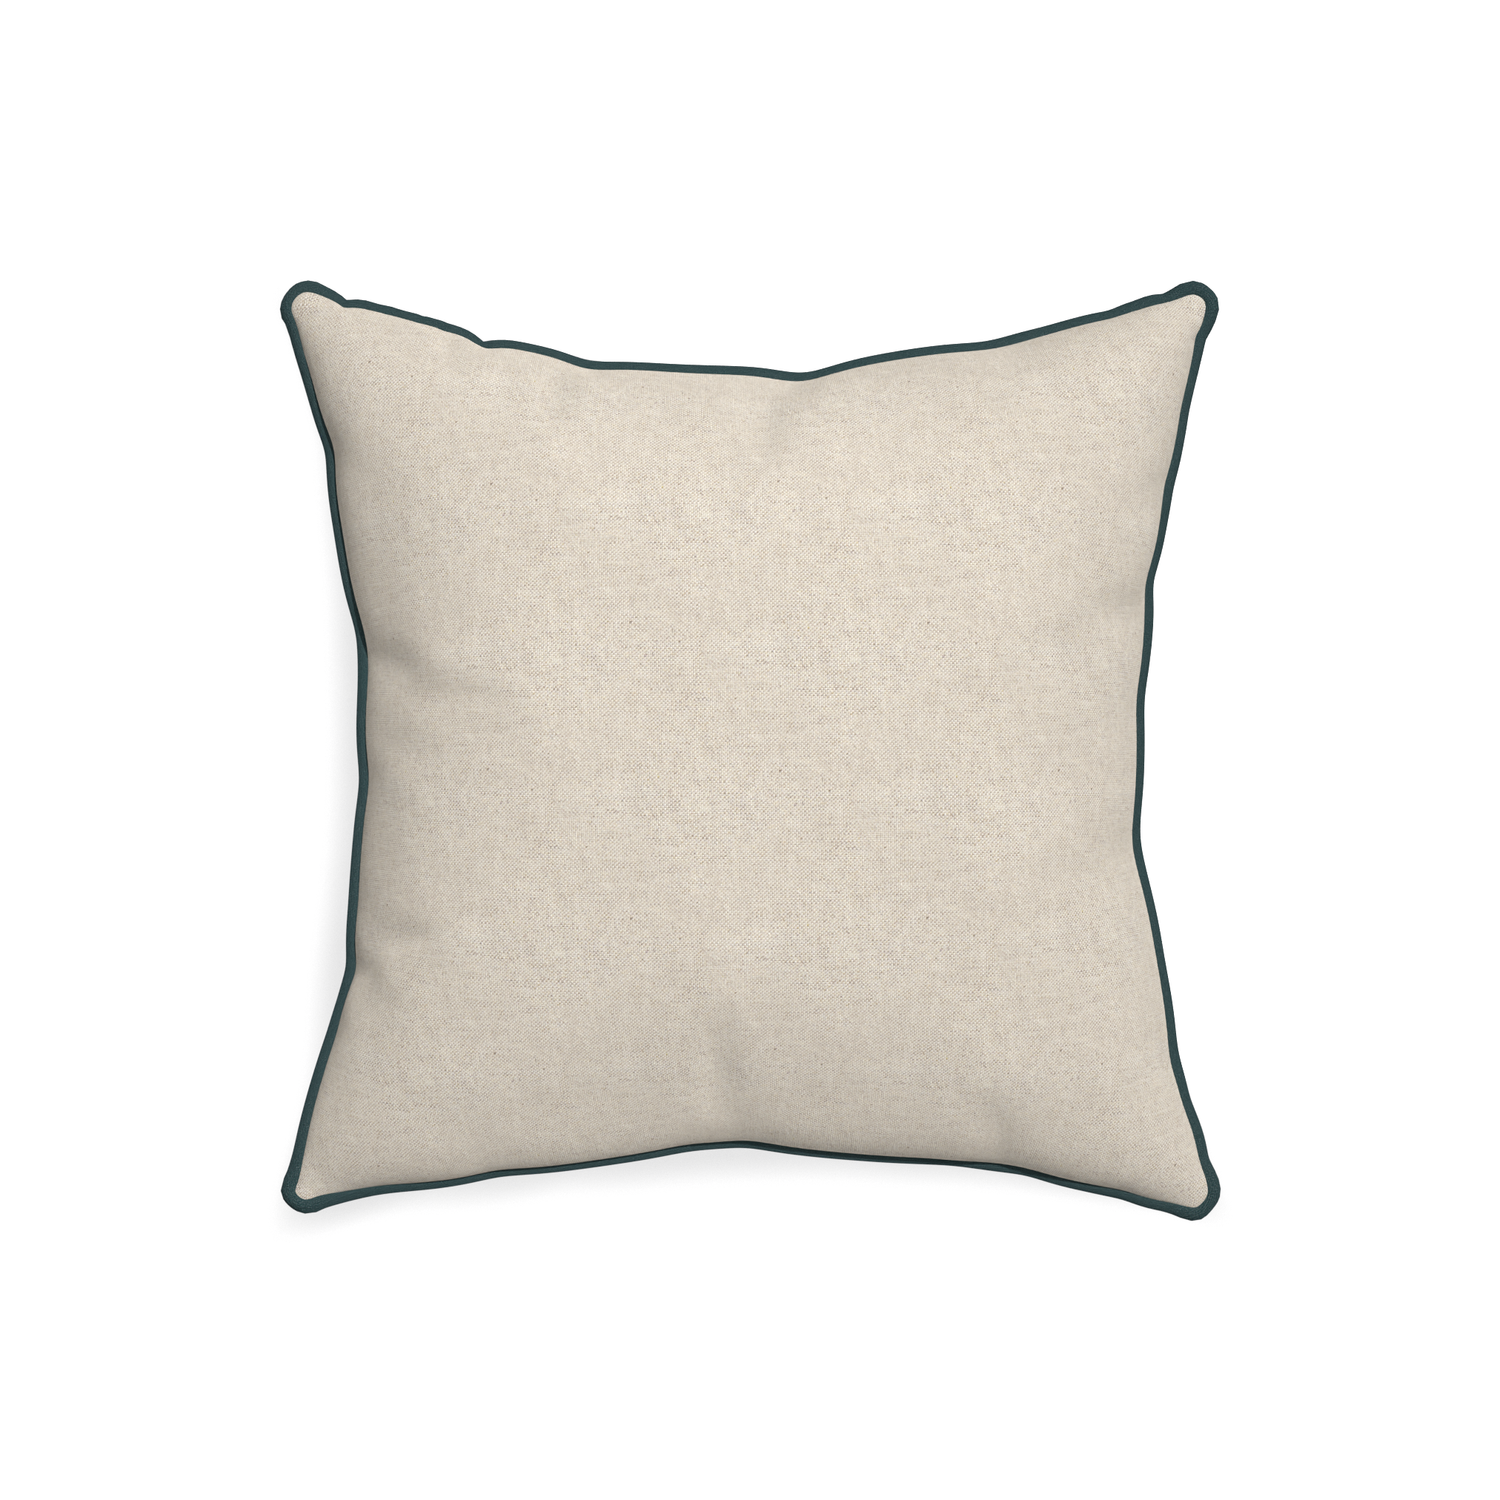 20-square oat custom light brownpillow with p piping on white background